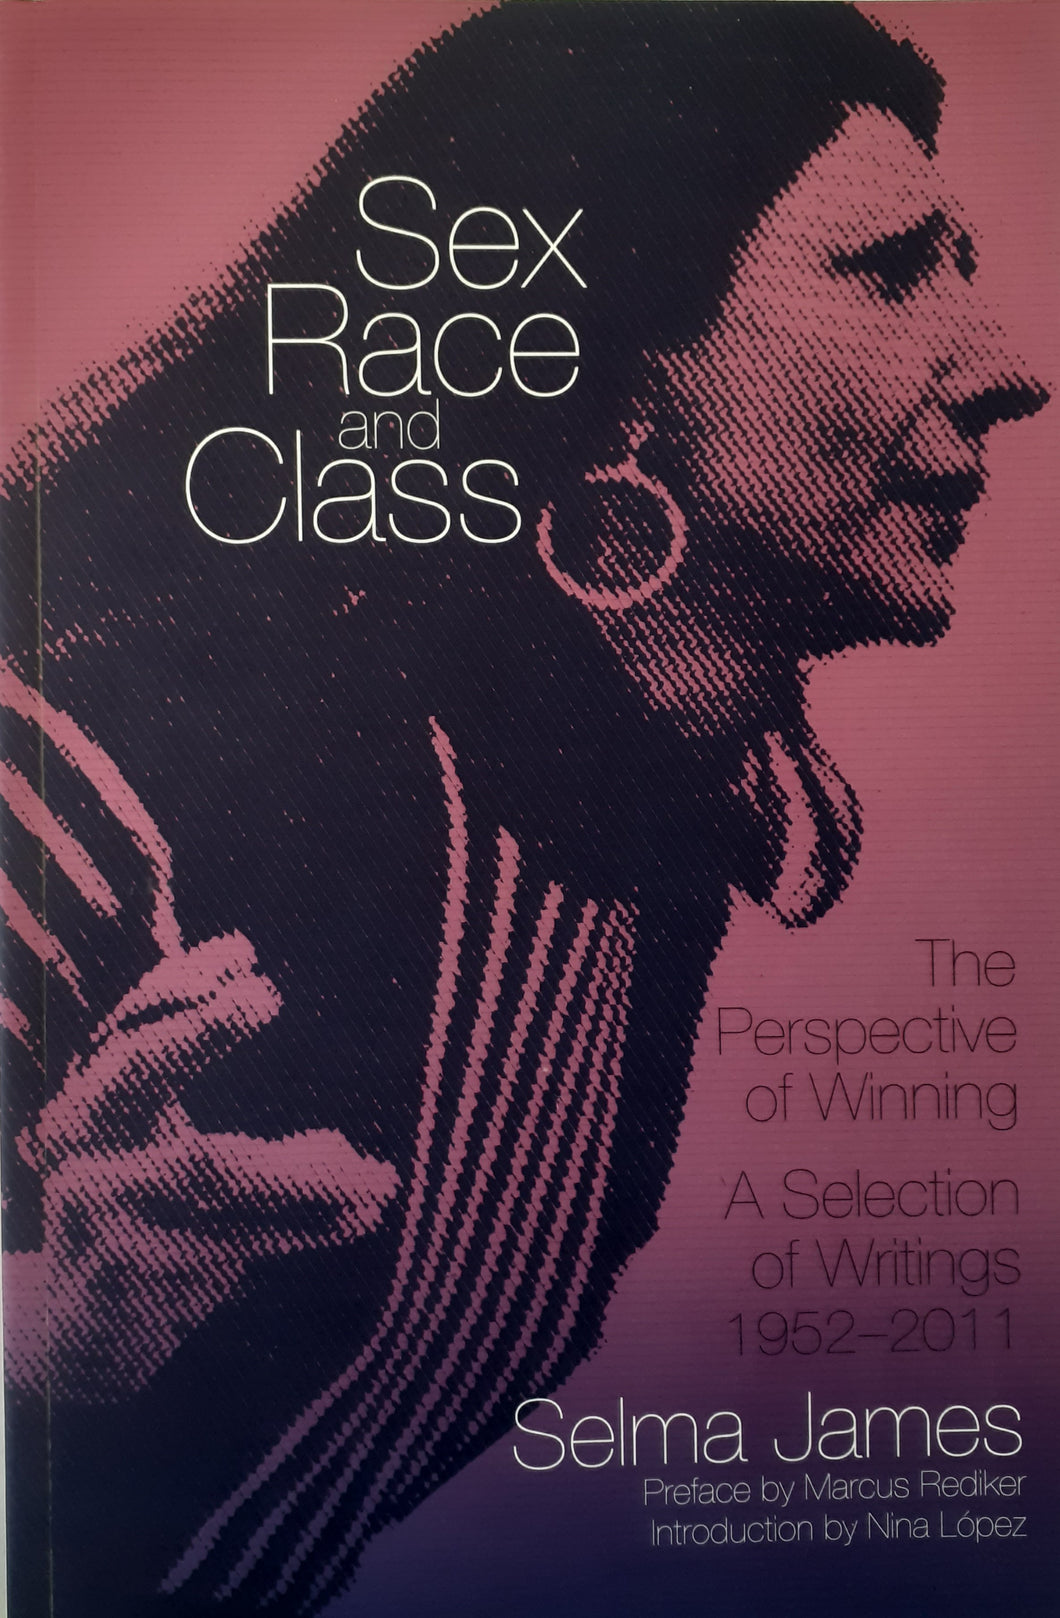 Sex, Race and Class: The Perspective of Winning